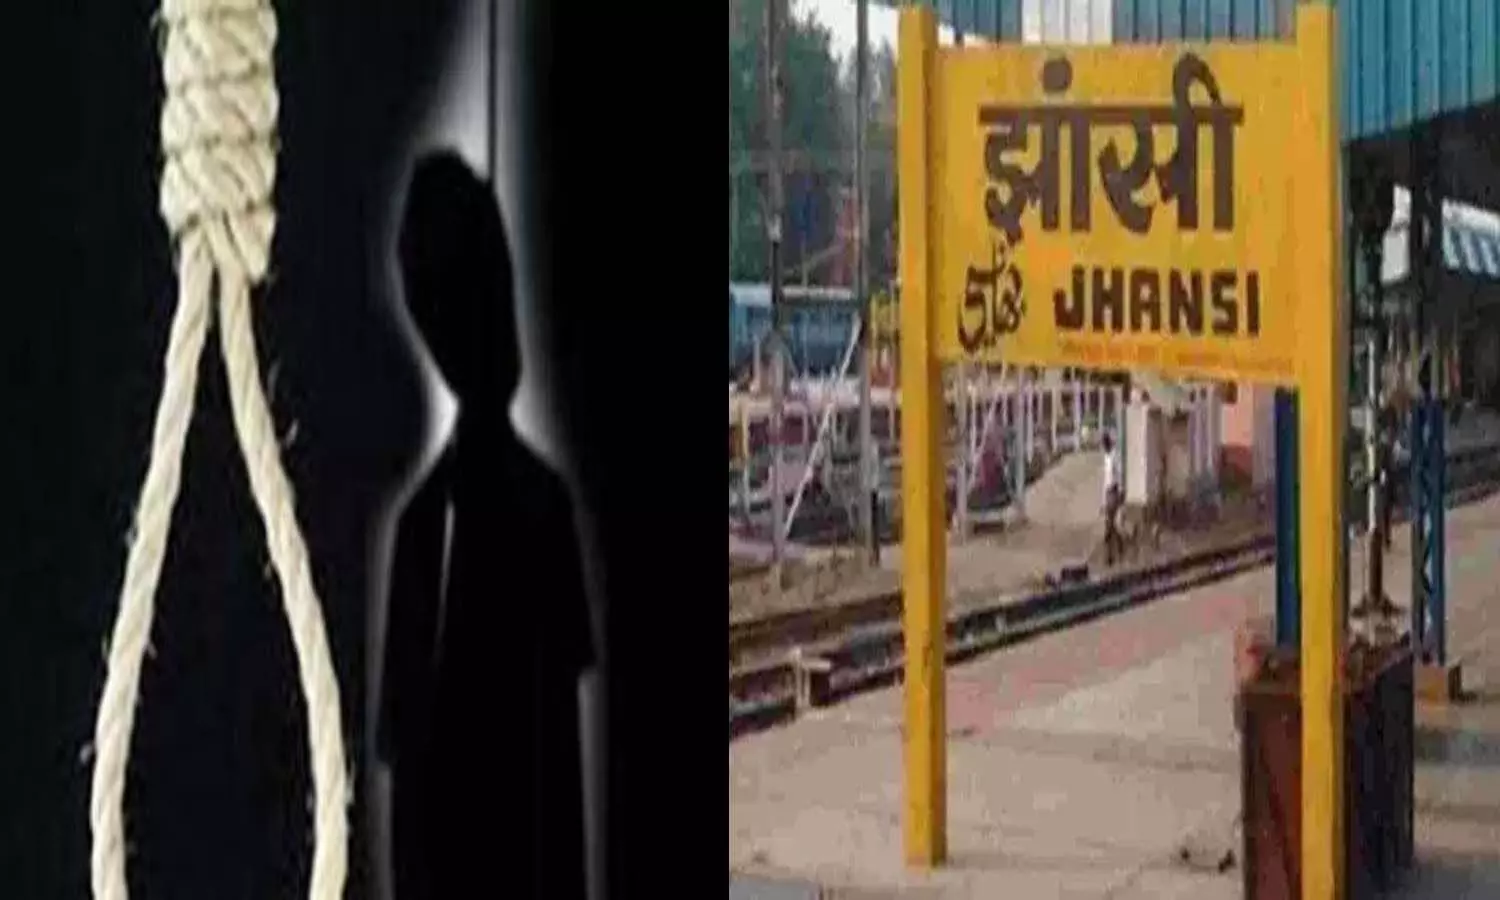 In Jhansi, the father scolded the son and the son hanged himself